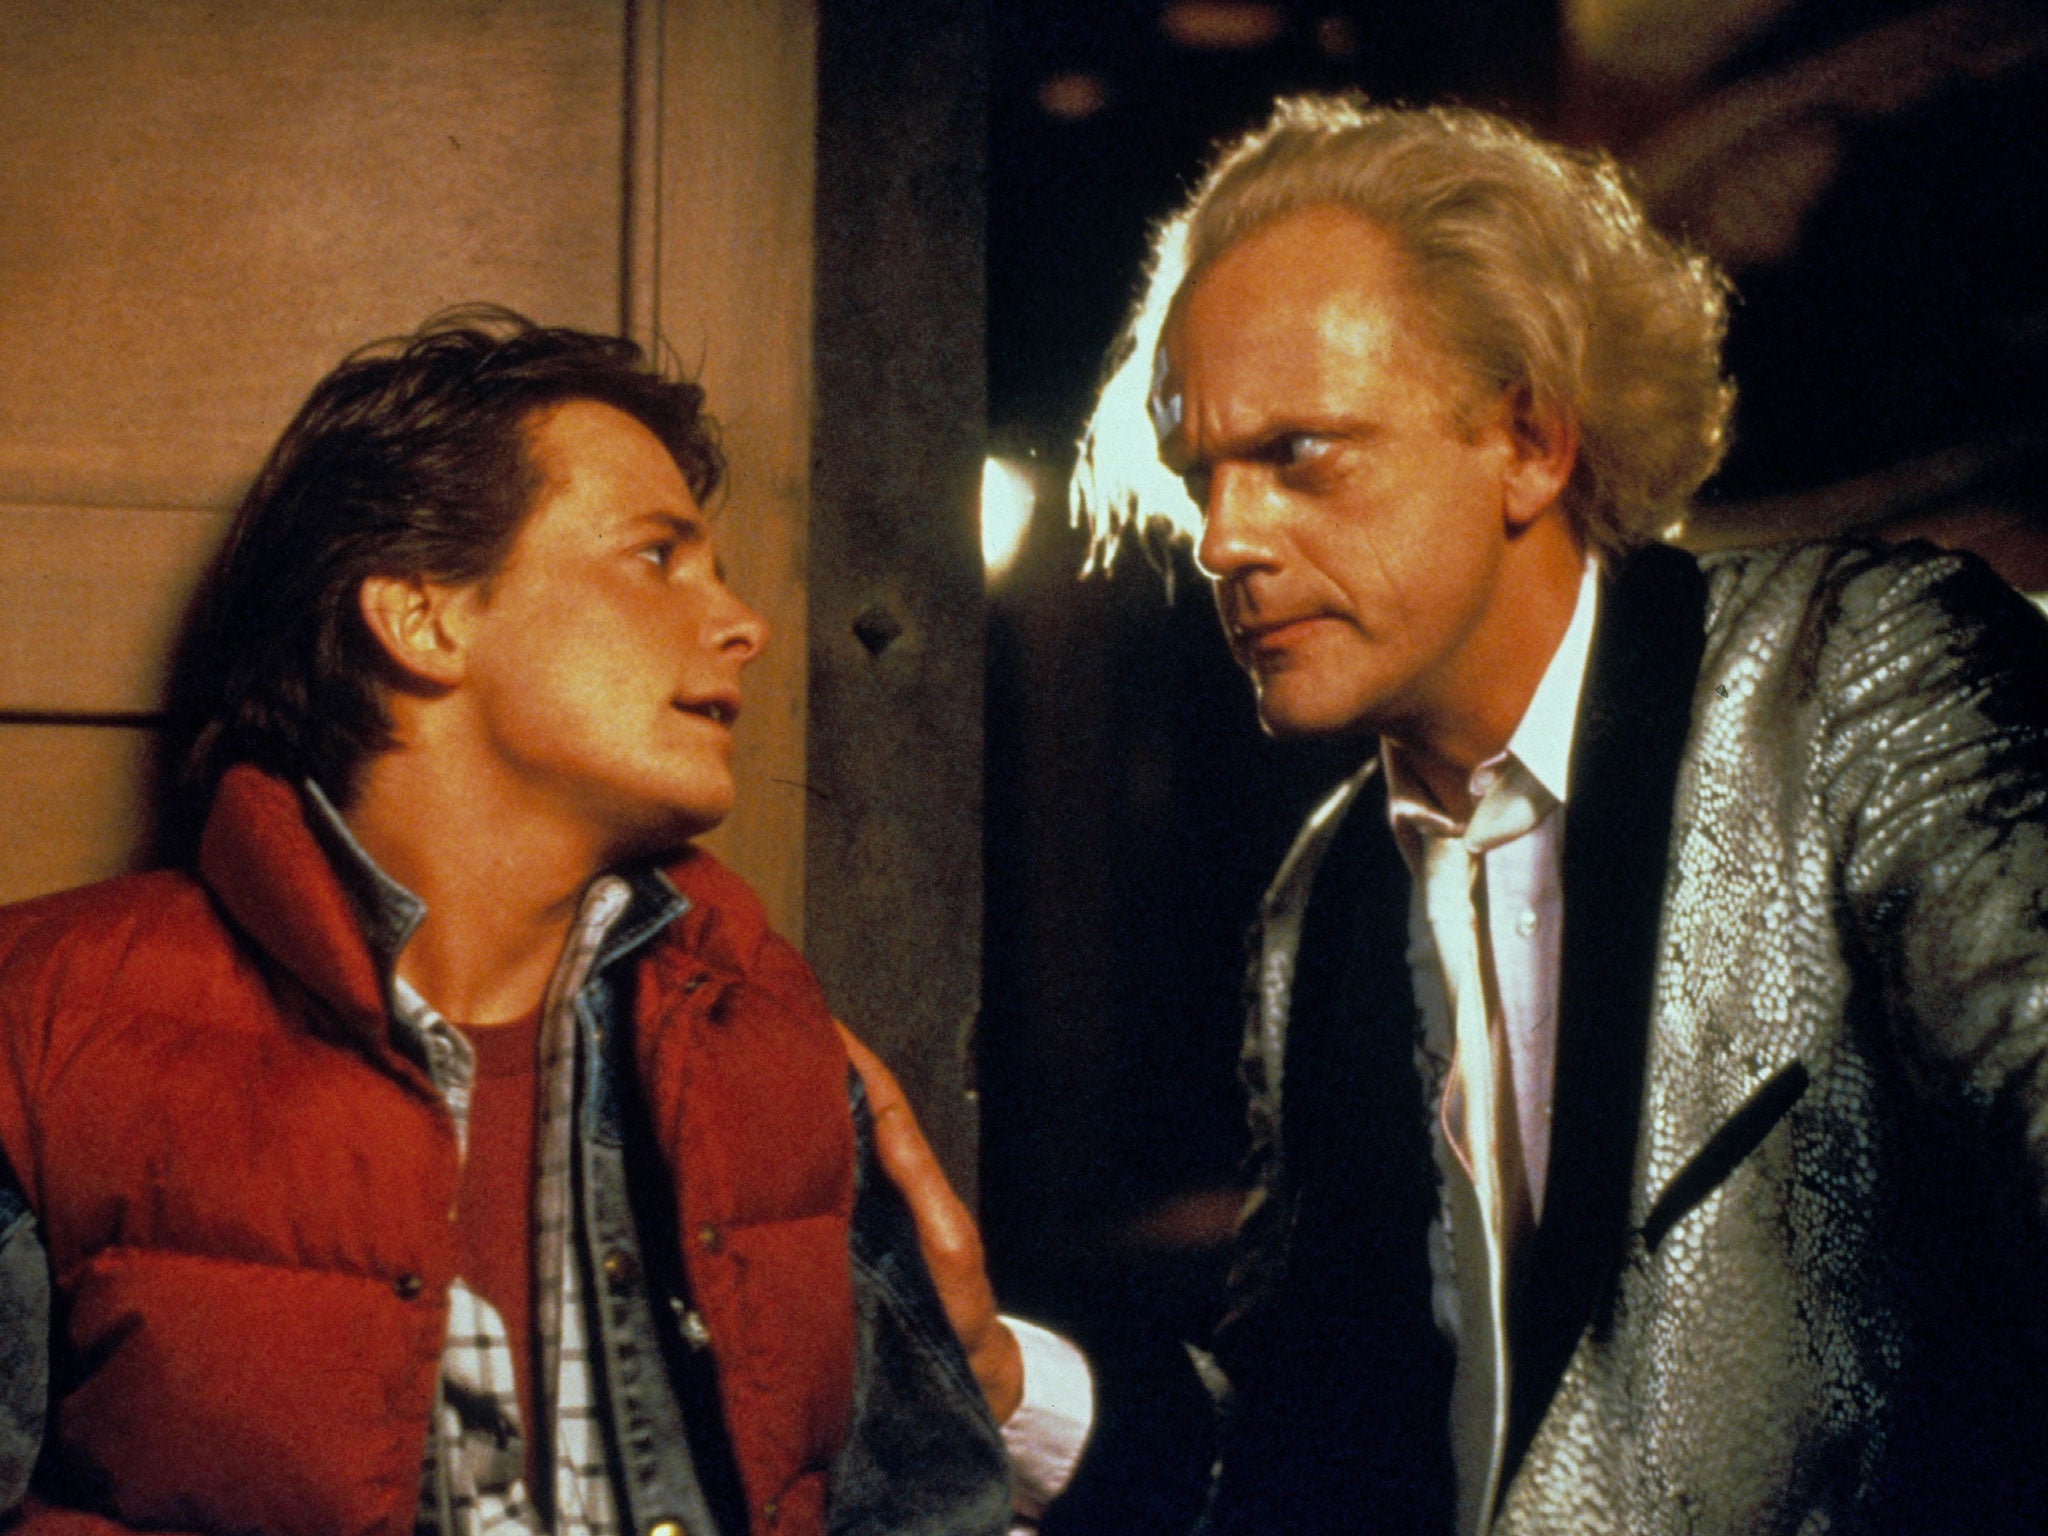 Michael J Fox and Christopher Lloyd in the first Back to the Future film in 1985